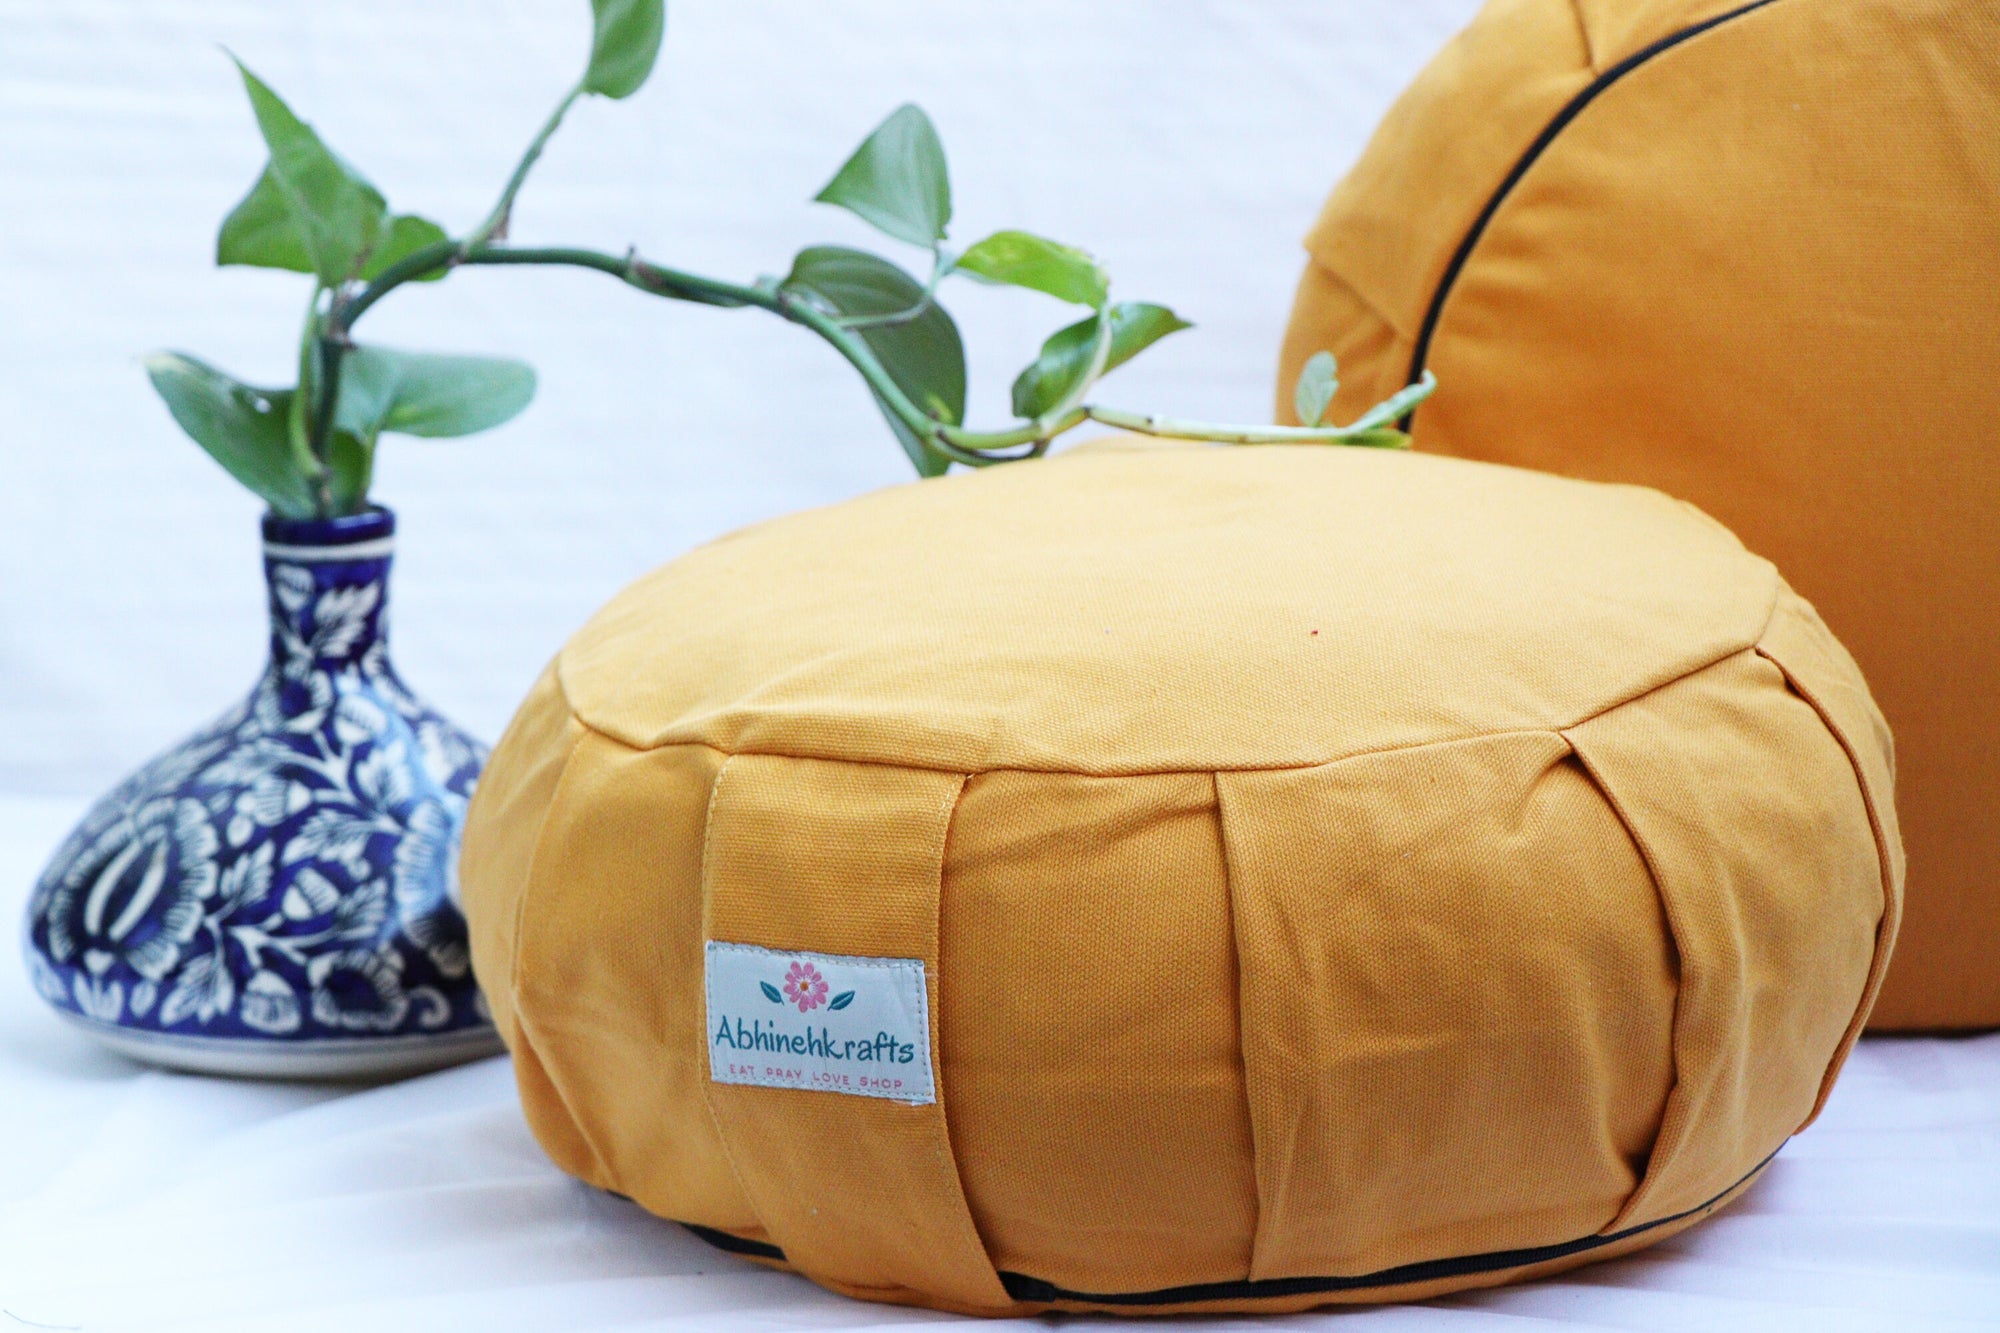 Round Zafu Yoga Cushion |Zipped Cover | Washable| Portable | Solid Colors | Filling Options Available - Medium Size